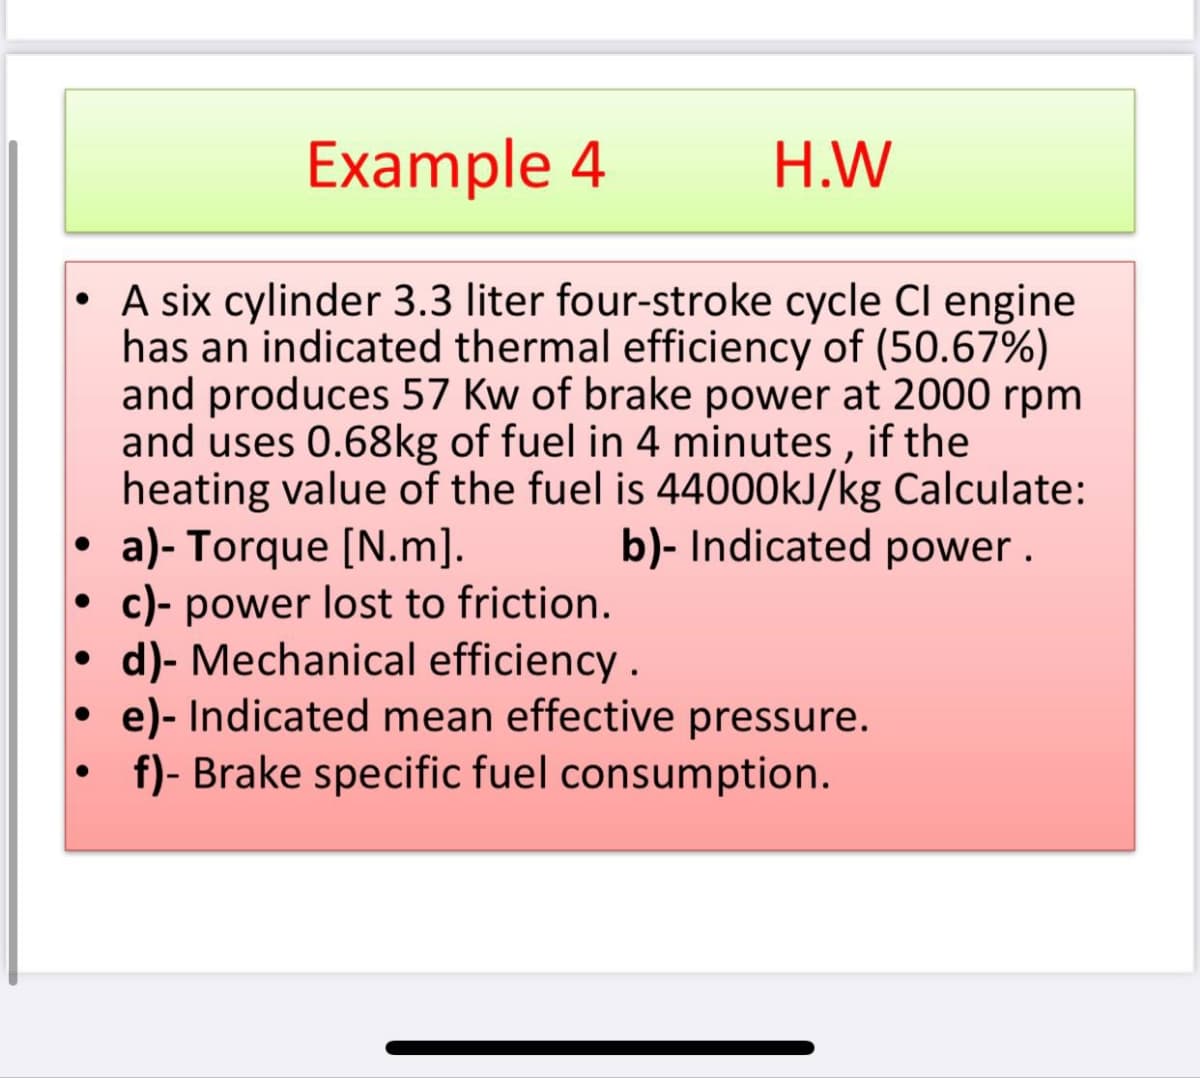 Example 4
H.W
• A six cylinder 3.3 liter four-stroke cycle Cl engine
has an indicated thermal efficiency of (50.67%)
and produces 57 Kw of brake power at 2000 rpm
and uses 0.68kg of fuel in 4 minutes , if the
heating value of the fuel is 44000KJ/kg Calculate:
a)- Torque [N.m].
c)- power lost to friction.
d)- Mechanical efficiency .
• e)- Indicated mean effective pressure.
b)- Indicated power .
f)- Brake specific fuel consumption.
